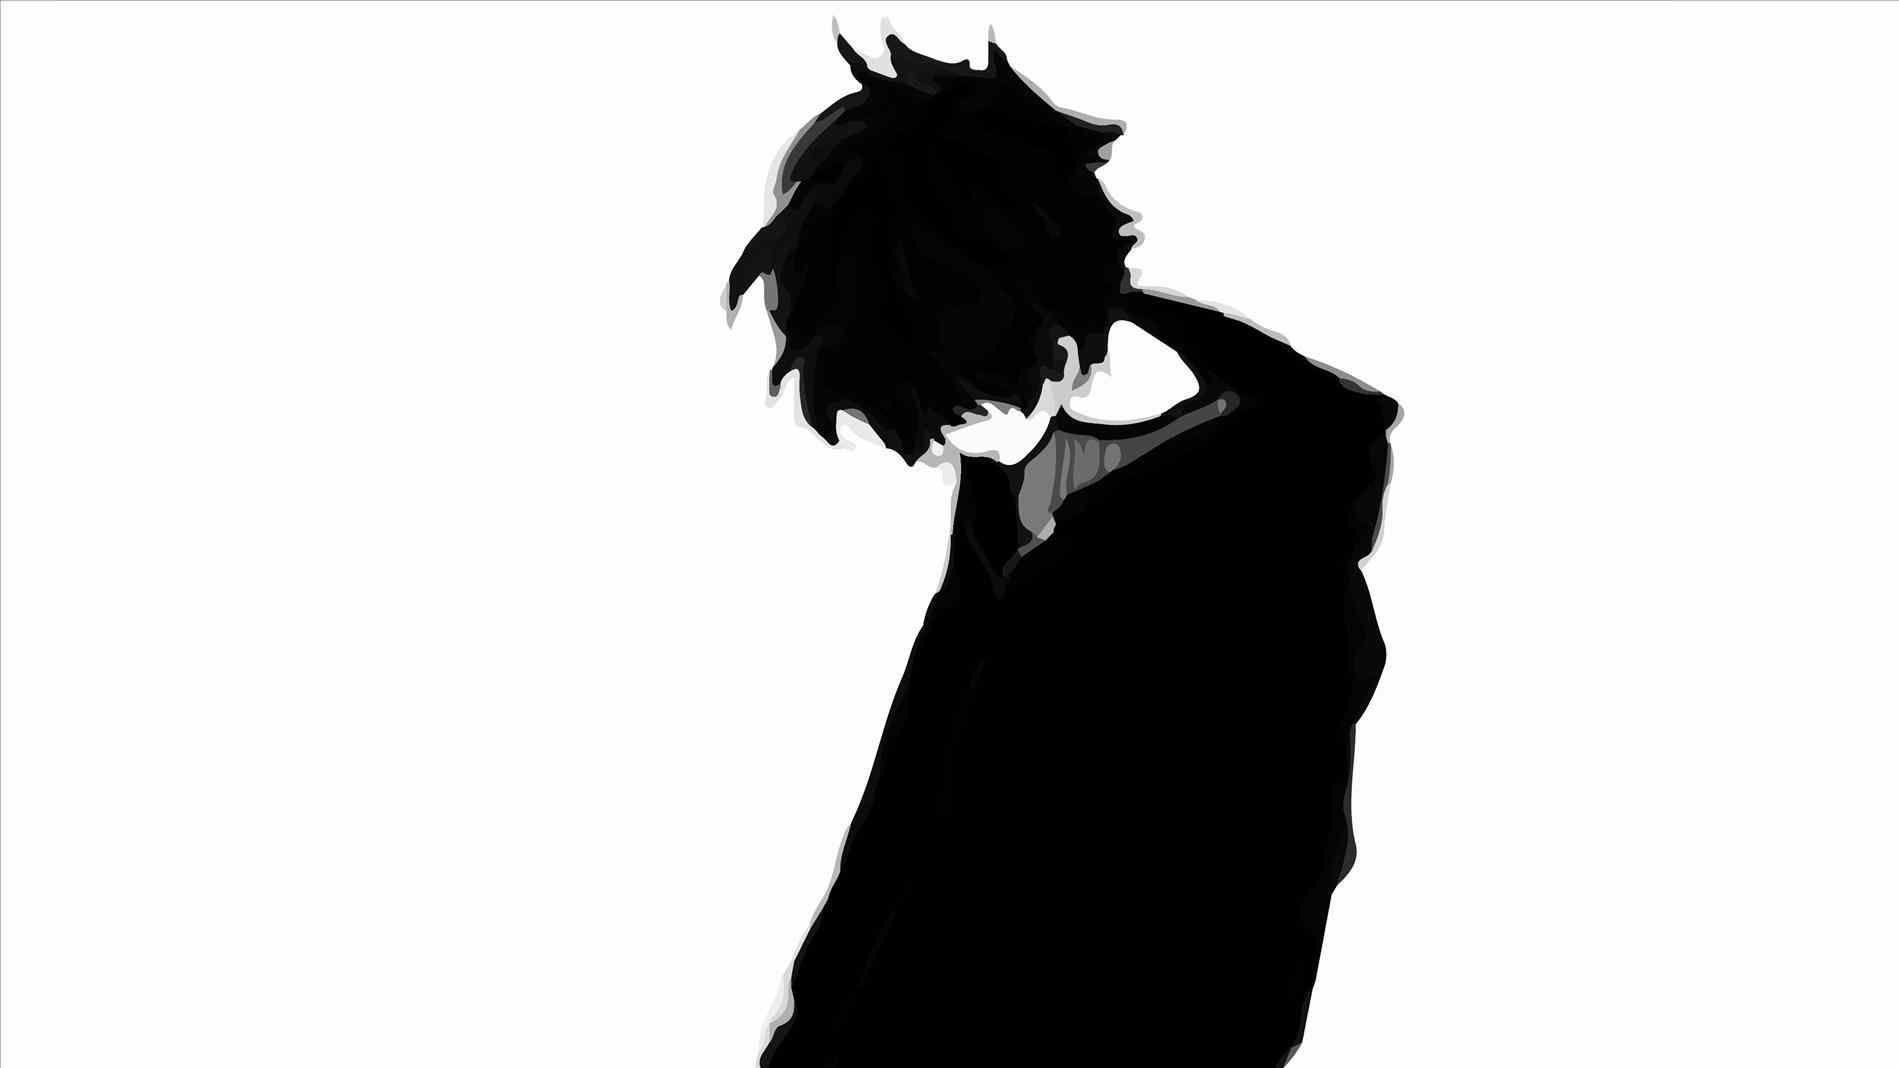 Black And White Anime Boy Wallpapers Top Free Black And White Anime Boy Backgrounds Wallpaperaccess